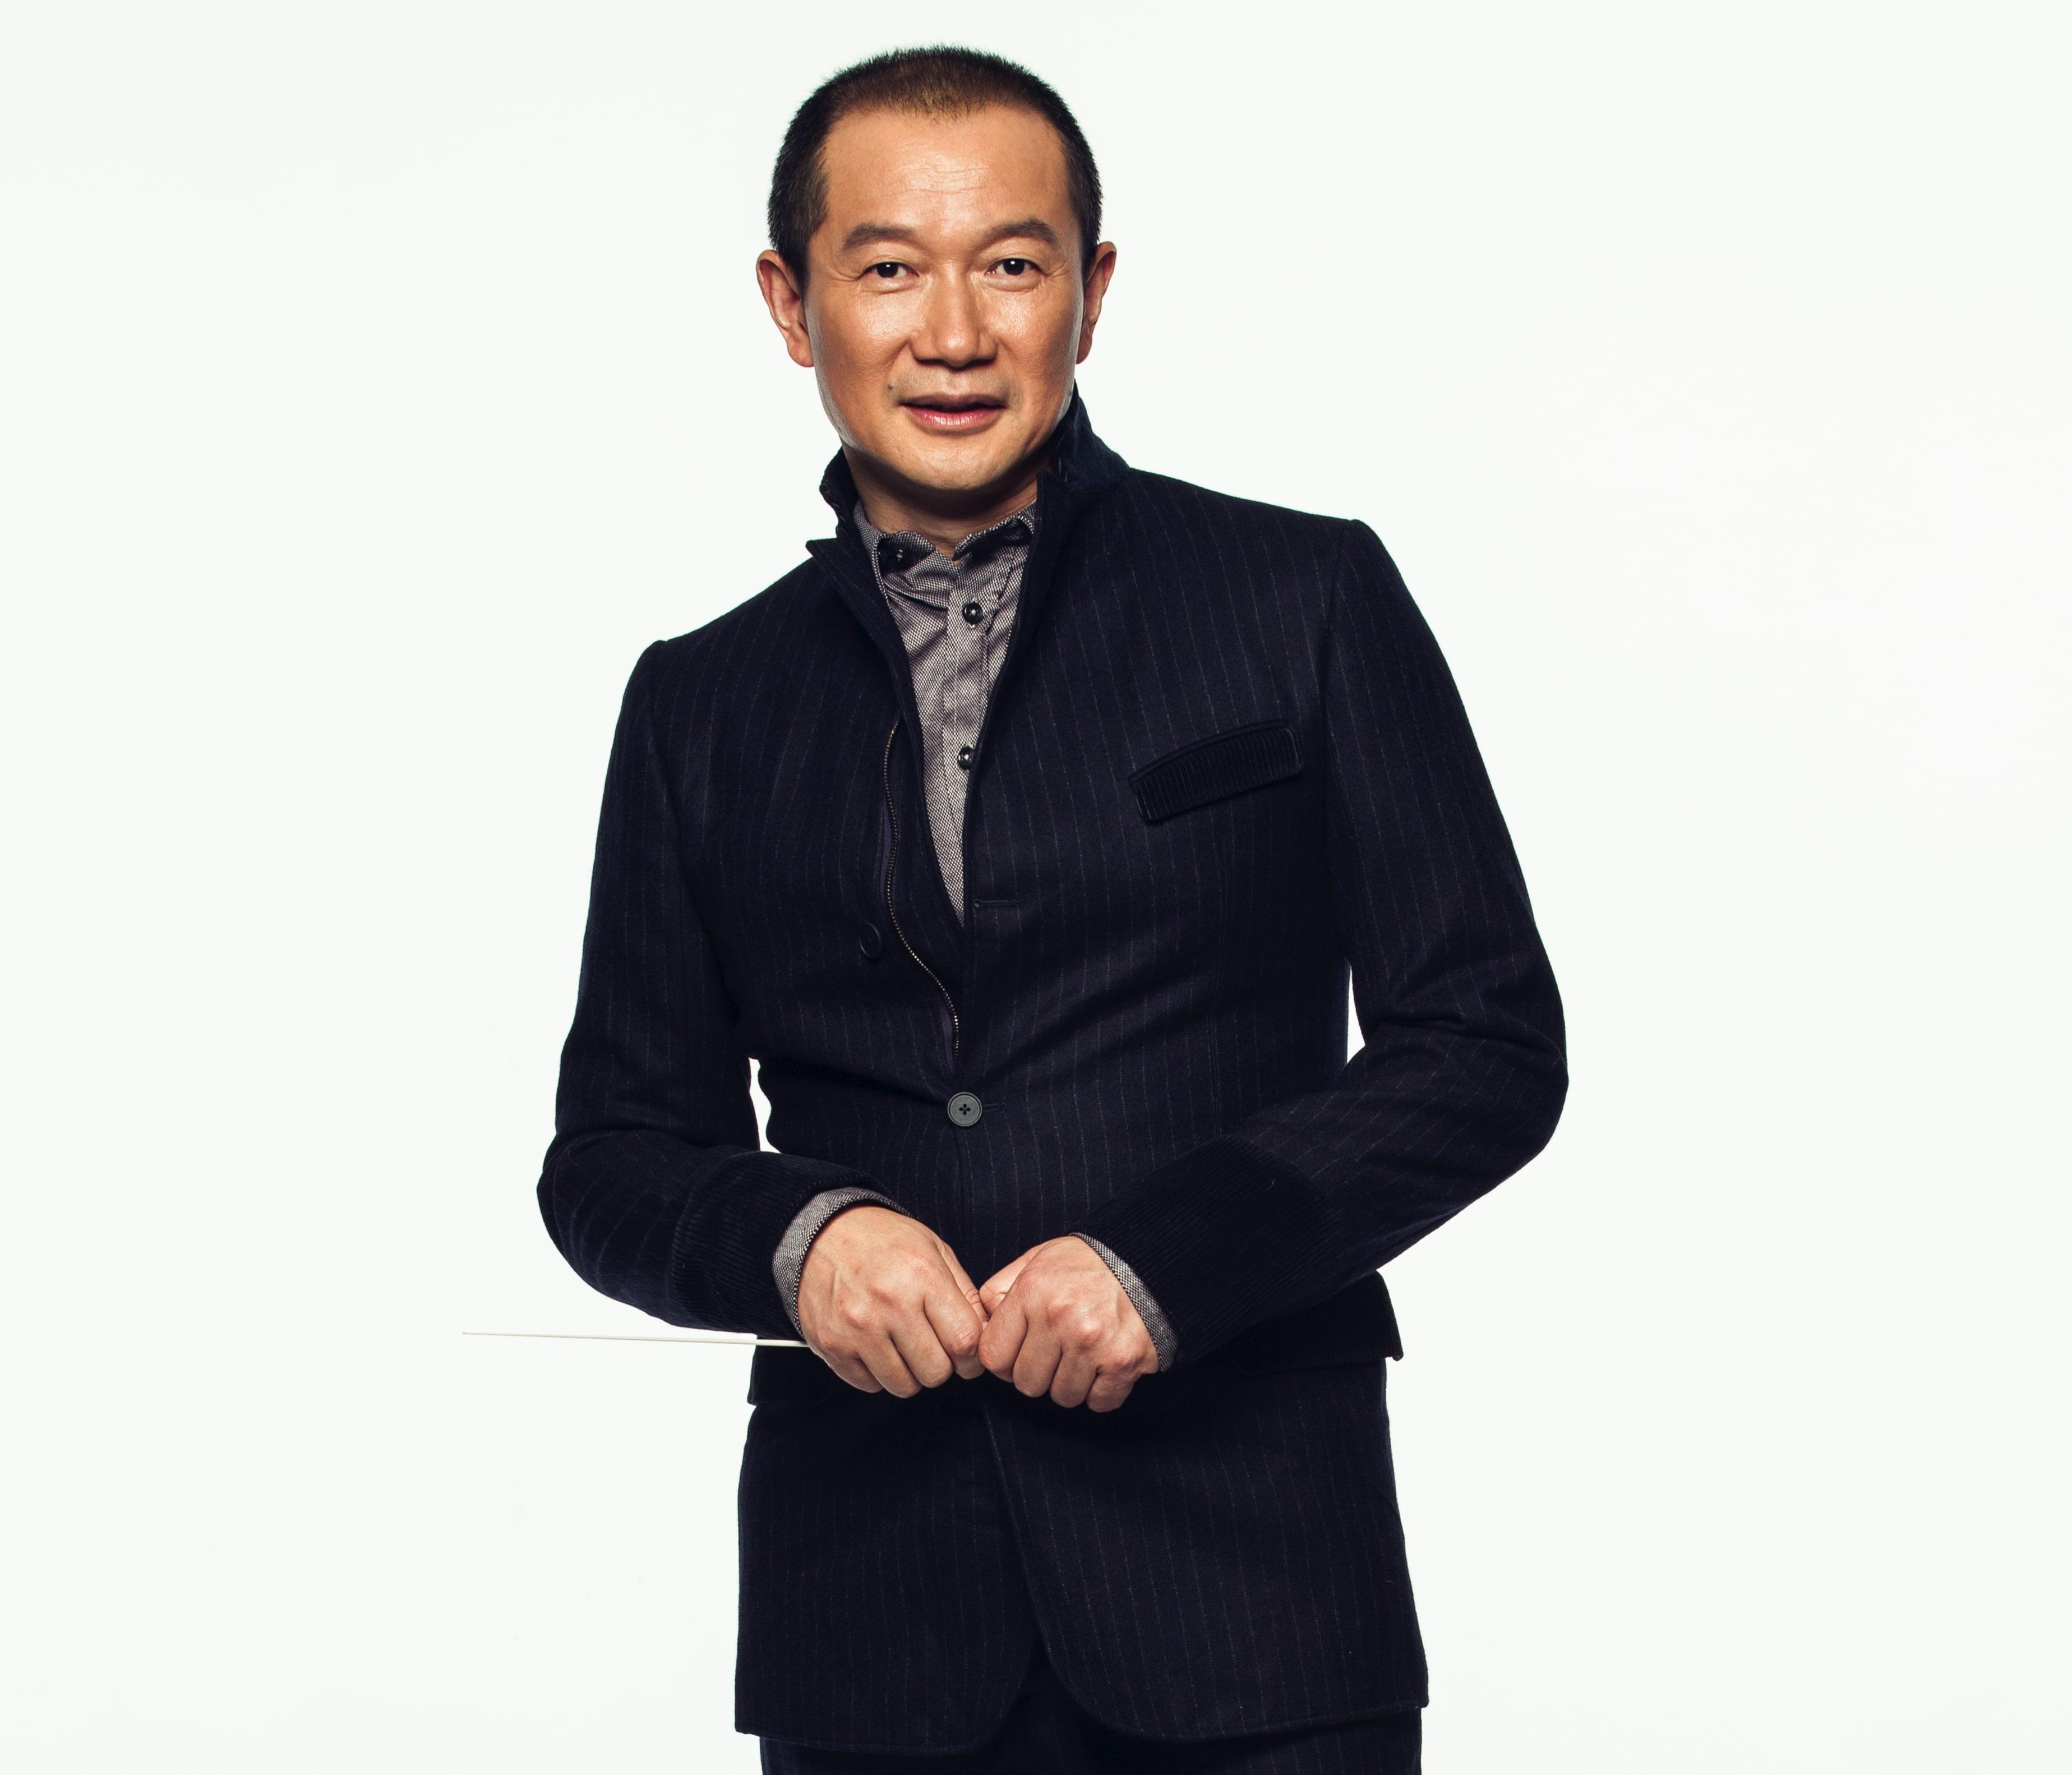 The Leisure and Cultural Services Department's "Tan Dun WE-Festival" will kick off with the primitive "Opera and Dance Theatre" performances in December. Photo shows Tan Dun.